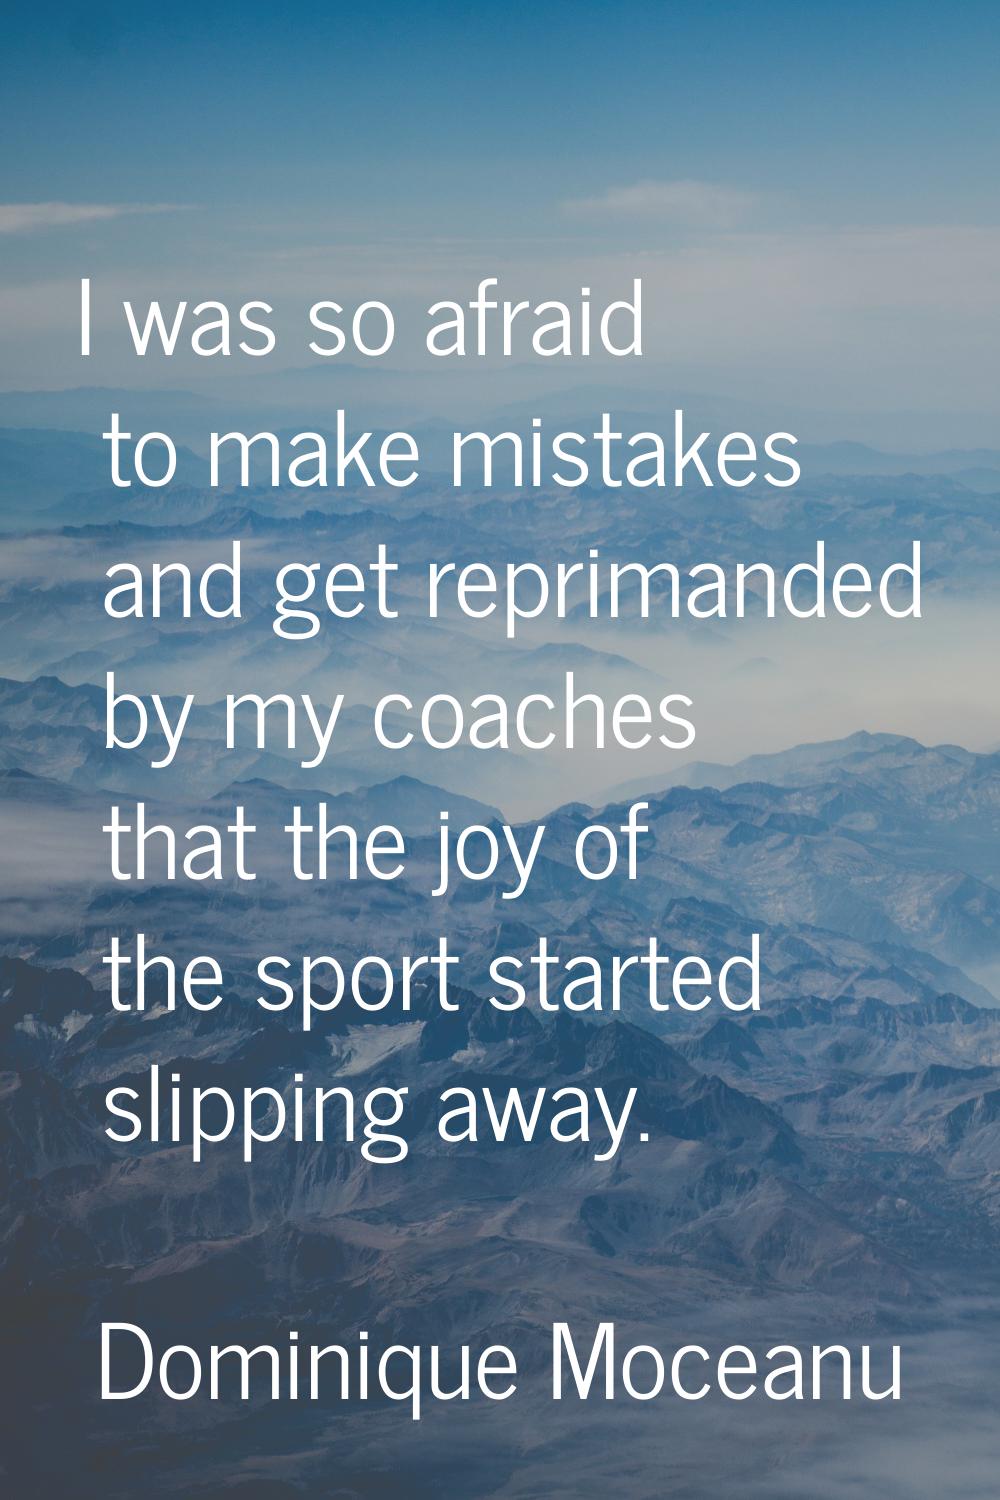 I was so afraid to make mistakes and get reprimanded by my coaches that the joy of the sport starte